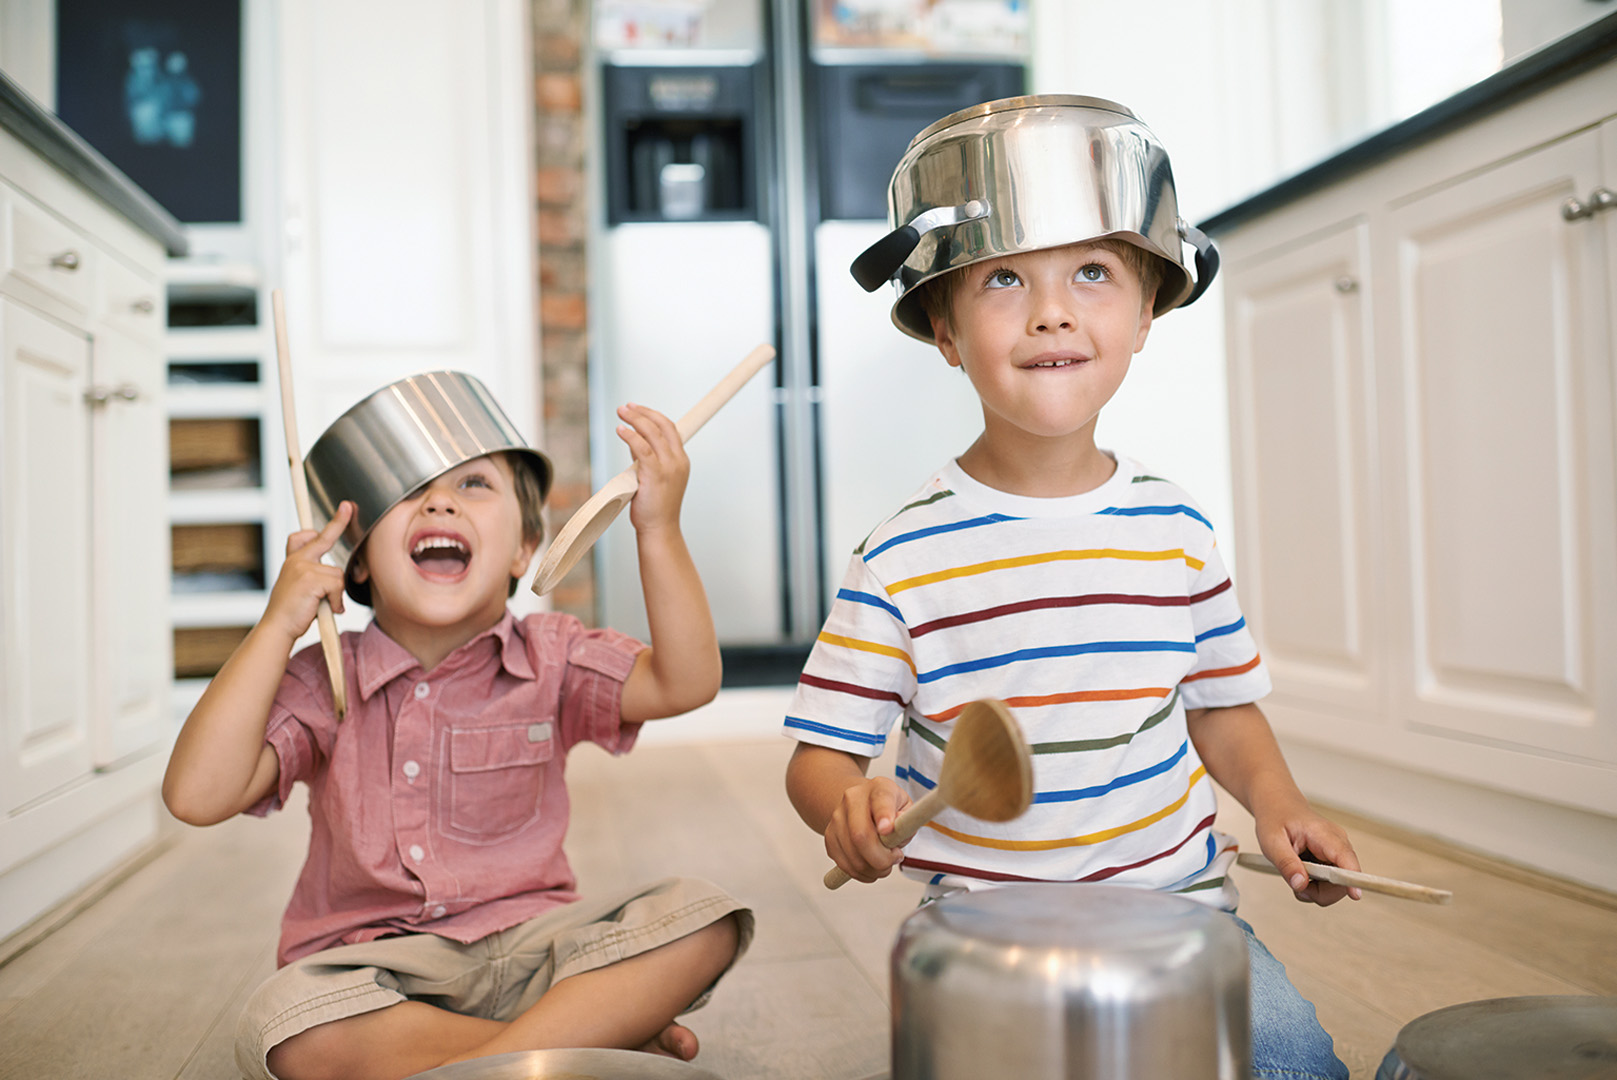 Raising boys means prioritising play. Two young boys playing with kitchen utensils and pots.